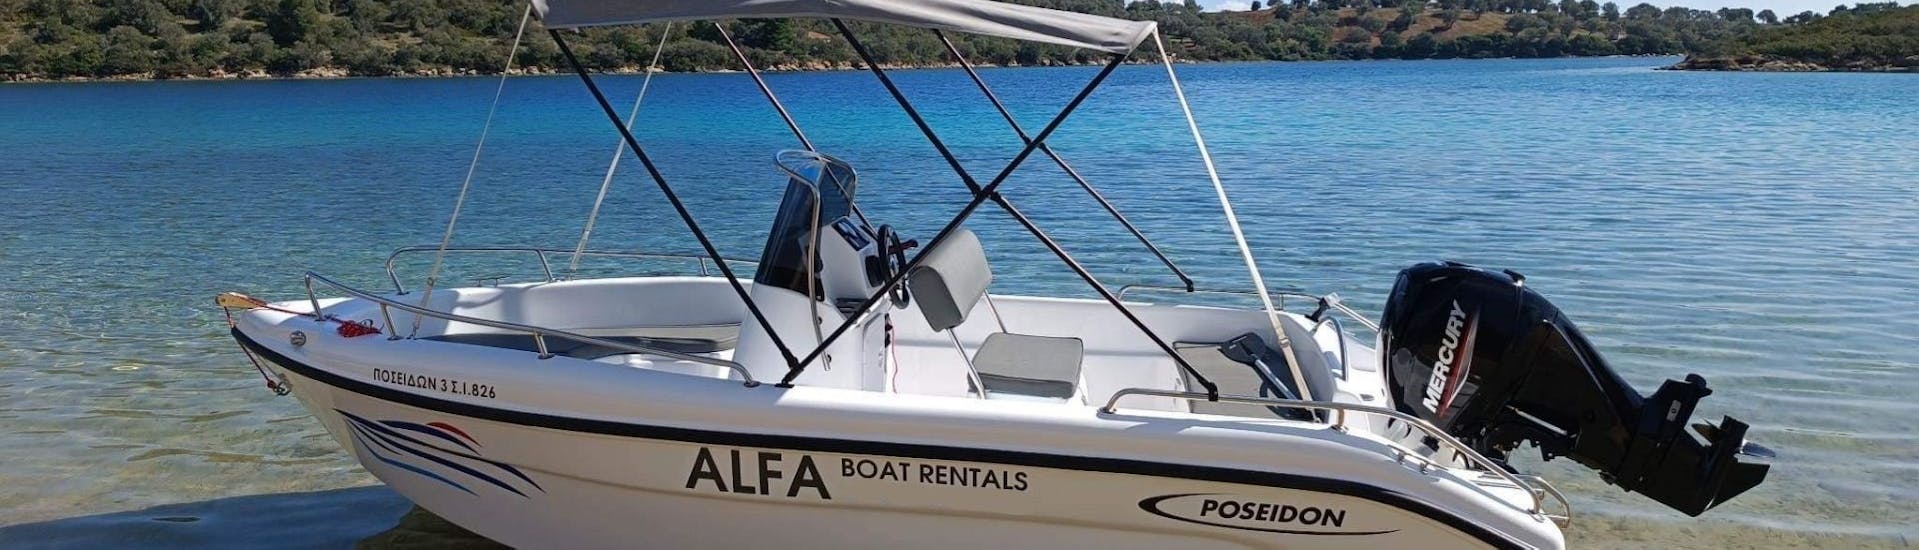 Our comfortable is waiting for you to start the Boat Rental in Vourvourou (up to 7 people) without Licence with Alfa Boat Rental﻿ Vourvourou.